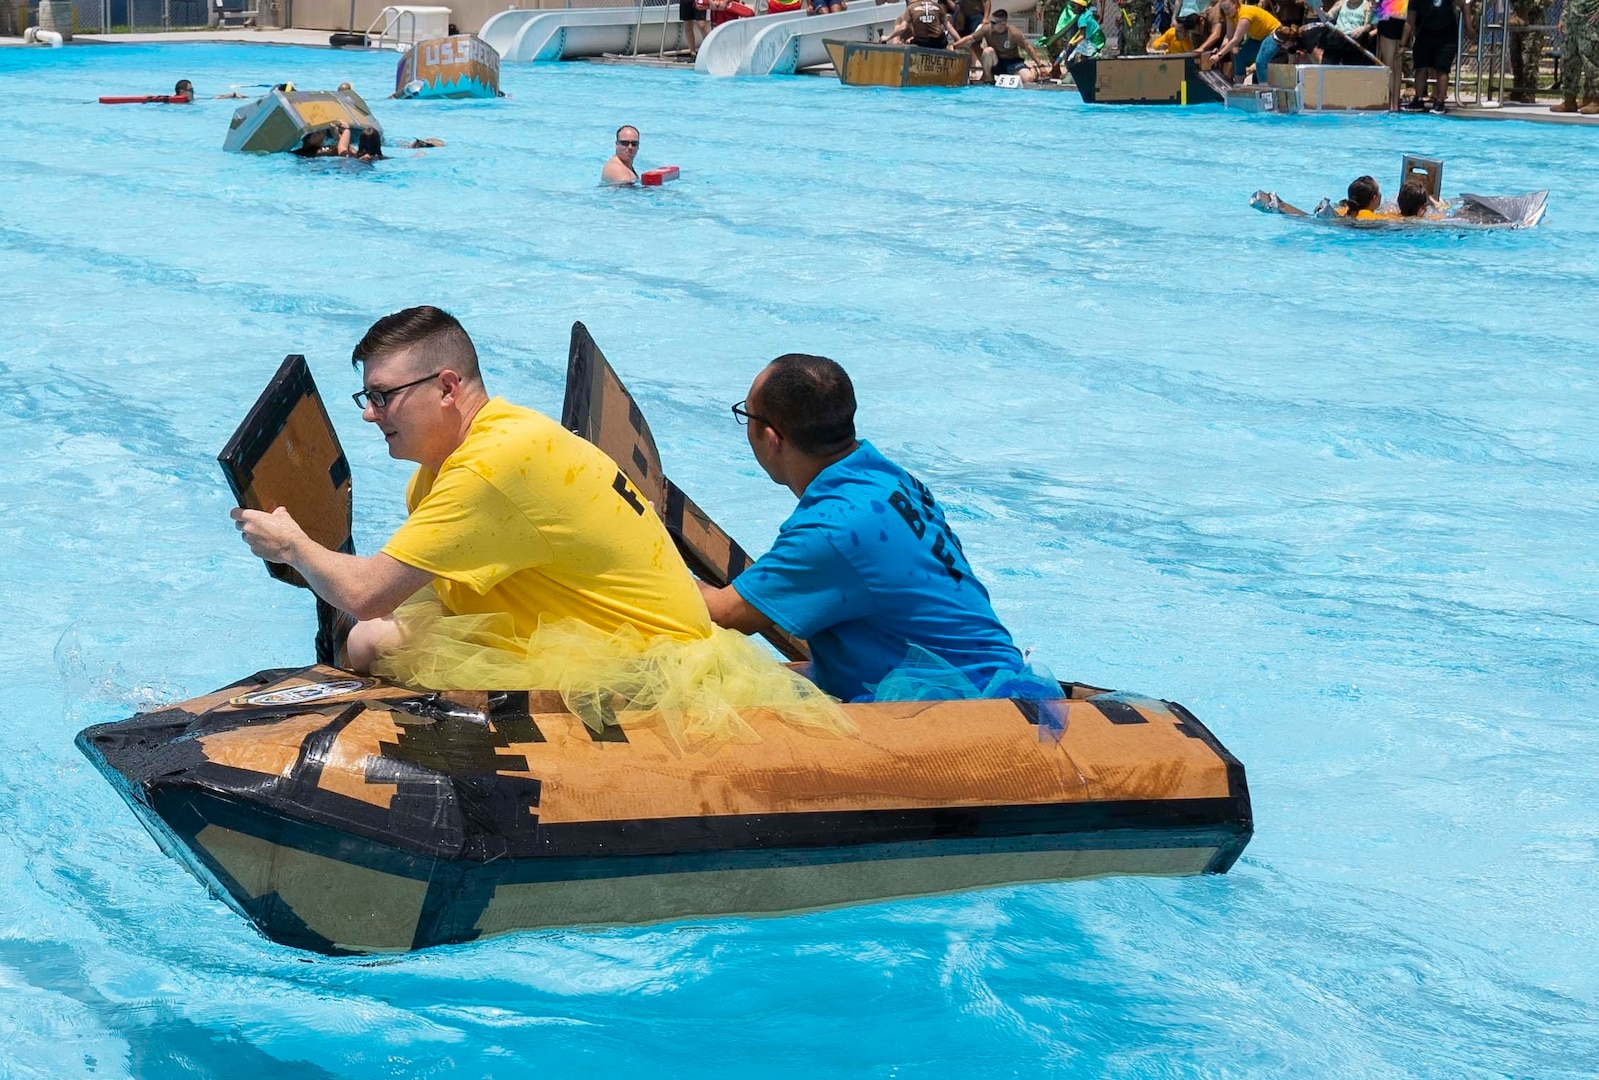 Sailors assigned to Navy Medicine Training Support Command, Defense Health Agency and Navy Medicine Education, Training and Logistics Command completed in a cardboard boat race as part of a Sailor 360 event at the Medicine Education Training Campus at Joint Base San Antonio-Fort Sam Houston. The event was part of Sailor 360, a Navy initiative to develop innovative and creative command-developed leadership programs.